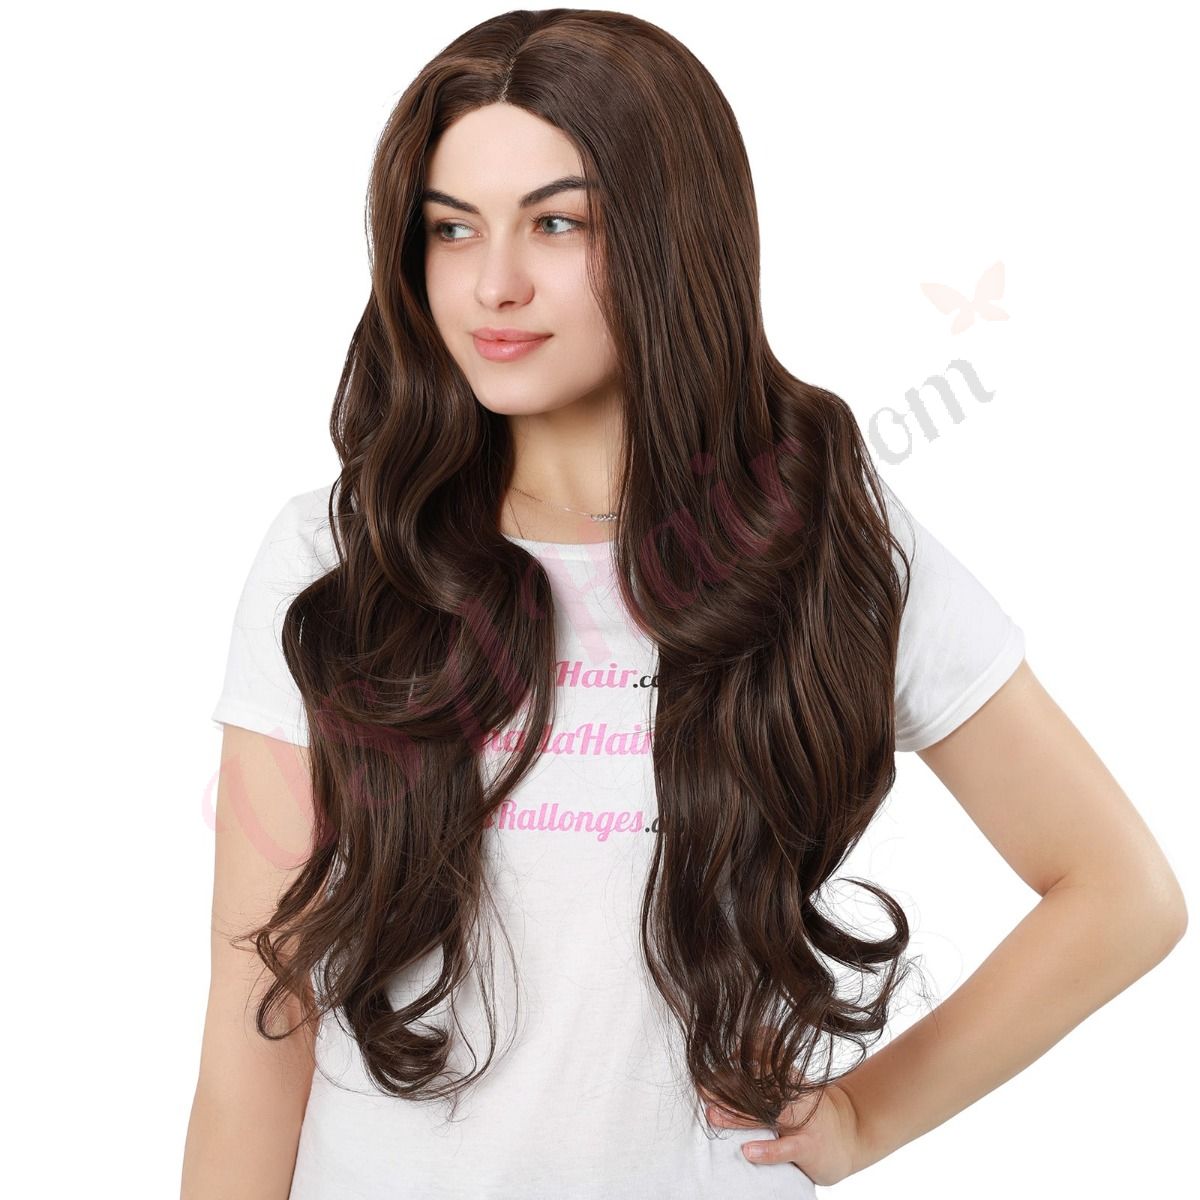 Remy Human Hair Wigs, Buy Realistic Wigs in USA Online